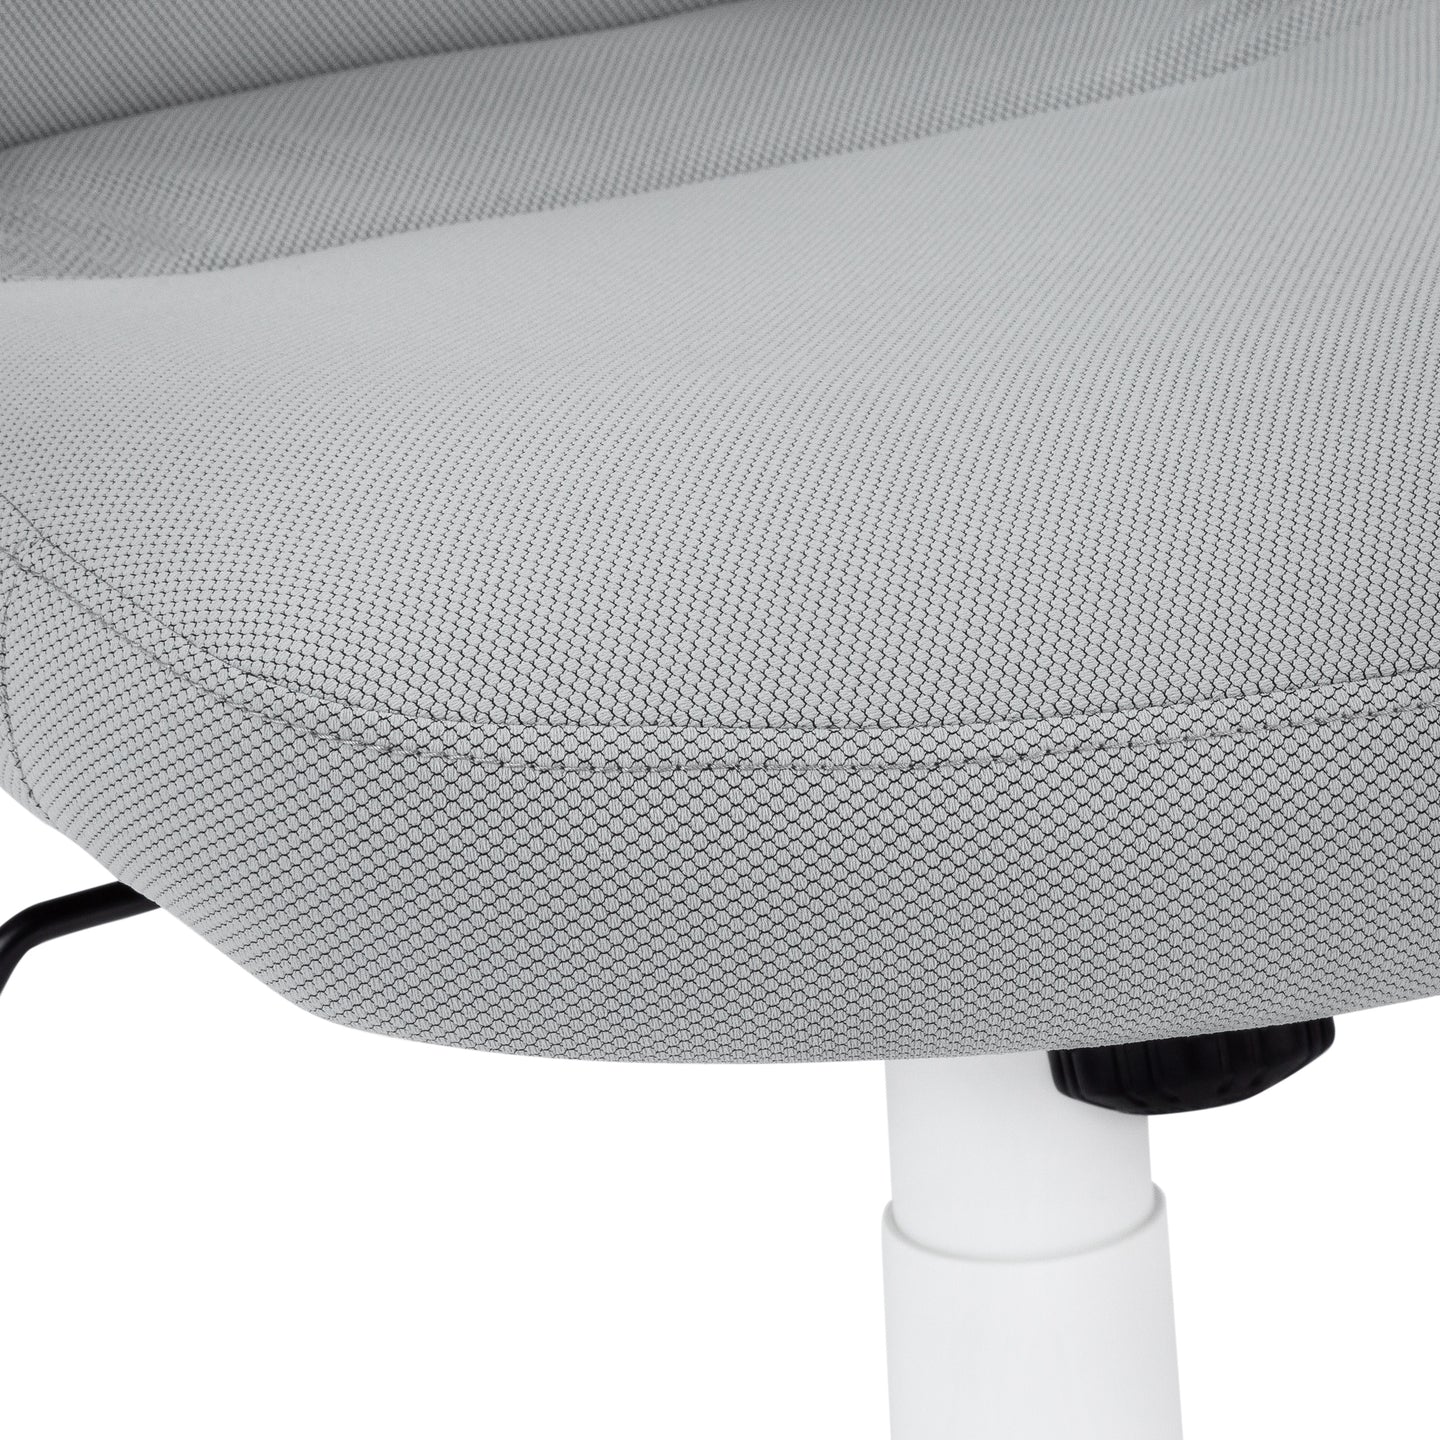 I 7324 Office Chair - White / Grey Fabric / Multi Position - Furniture Depot (7881132998904)